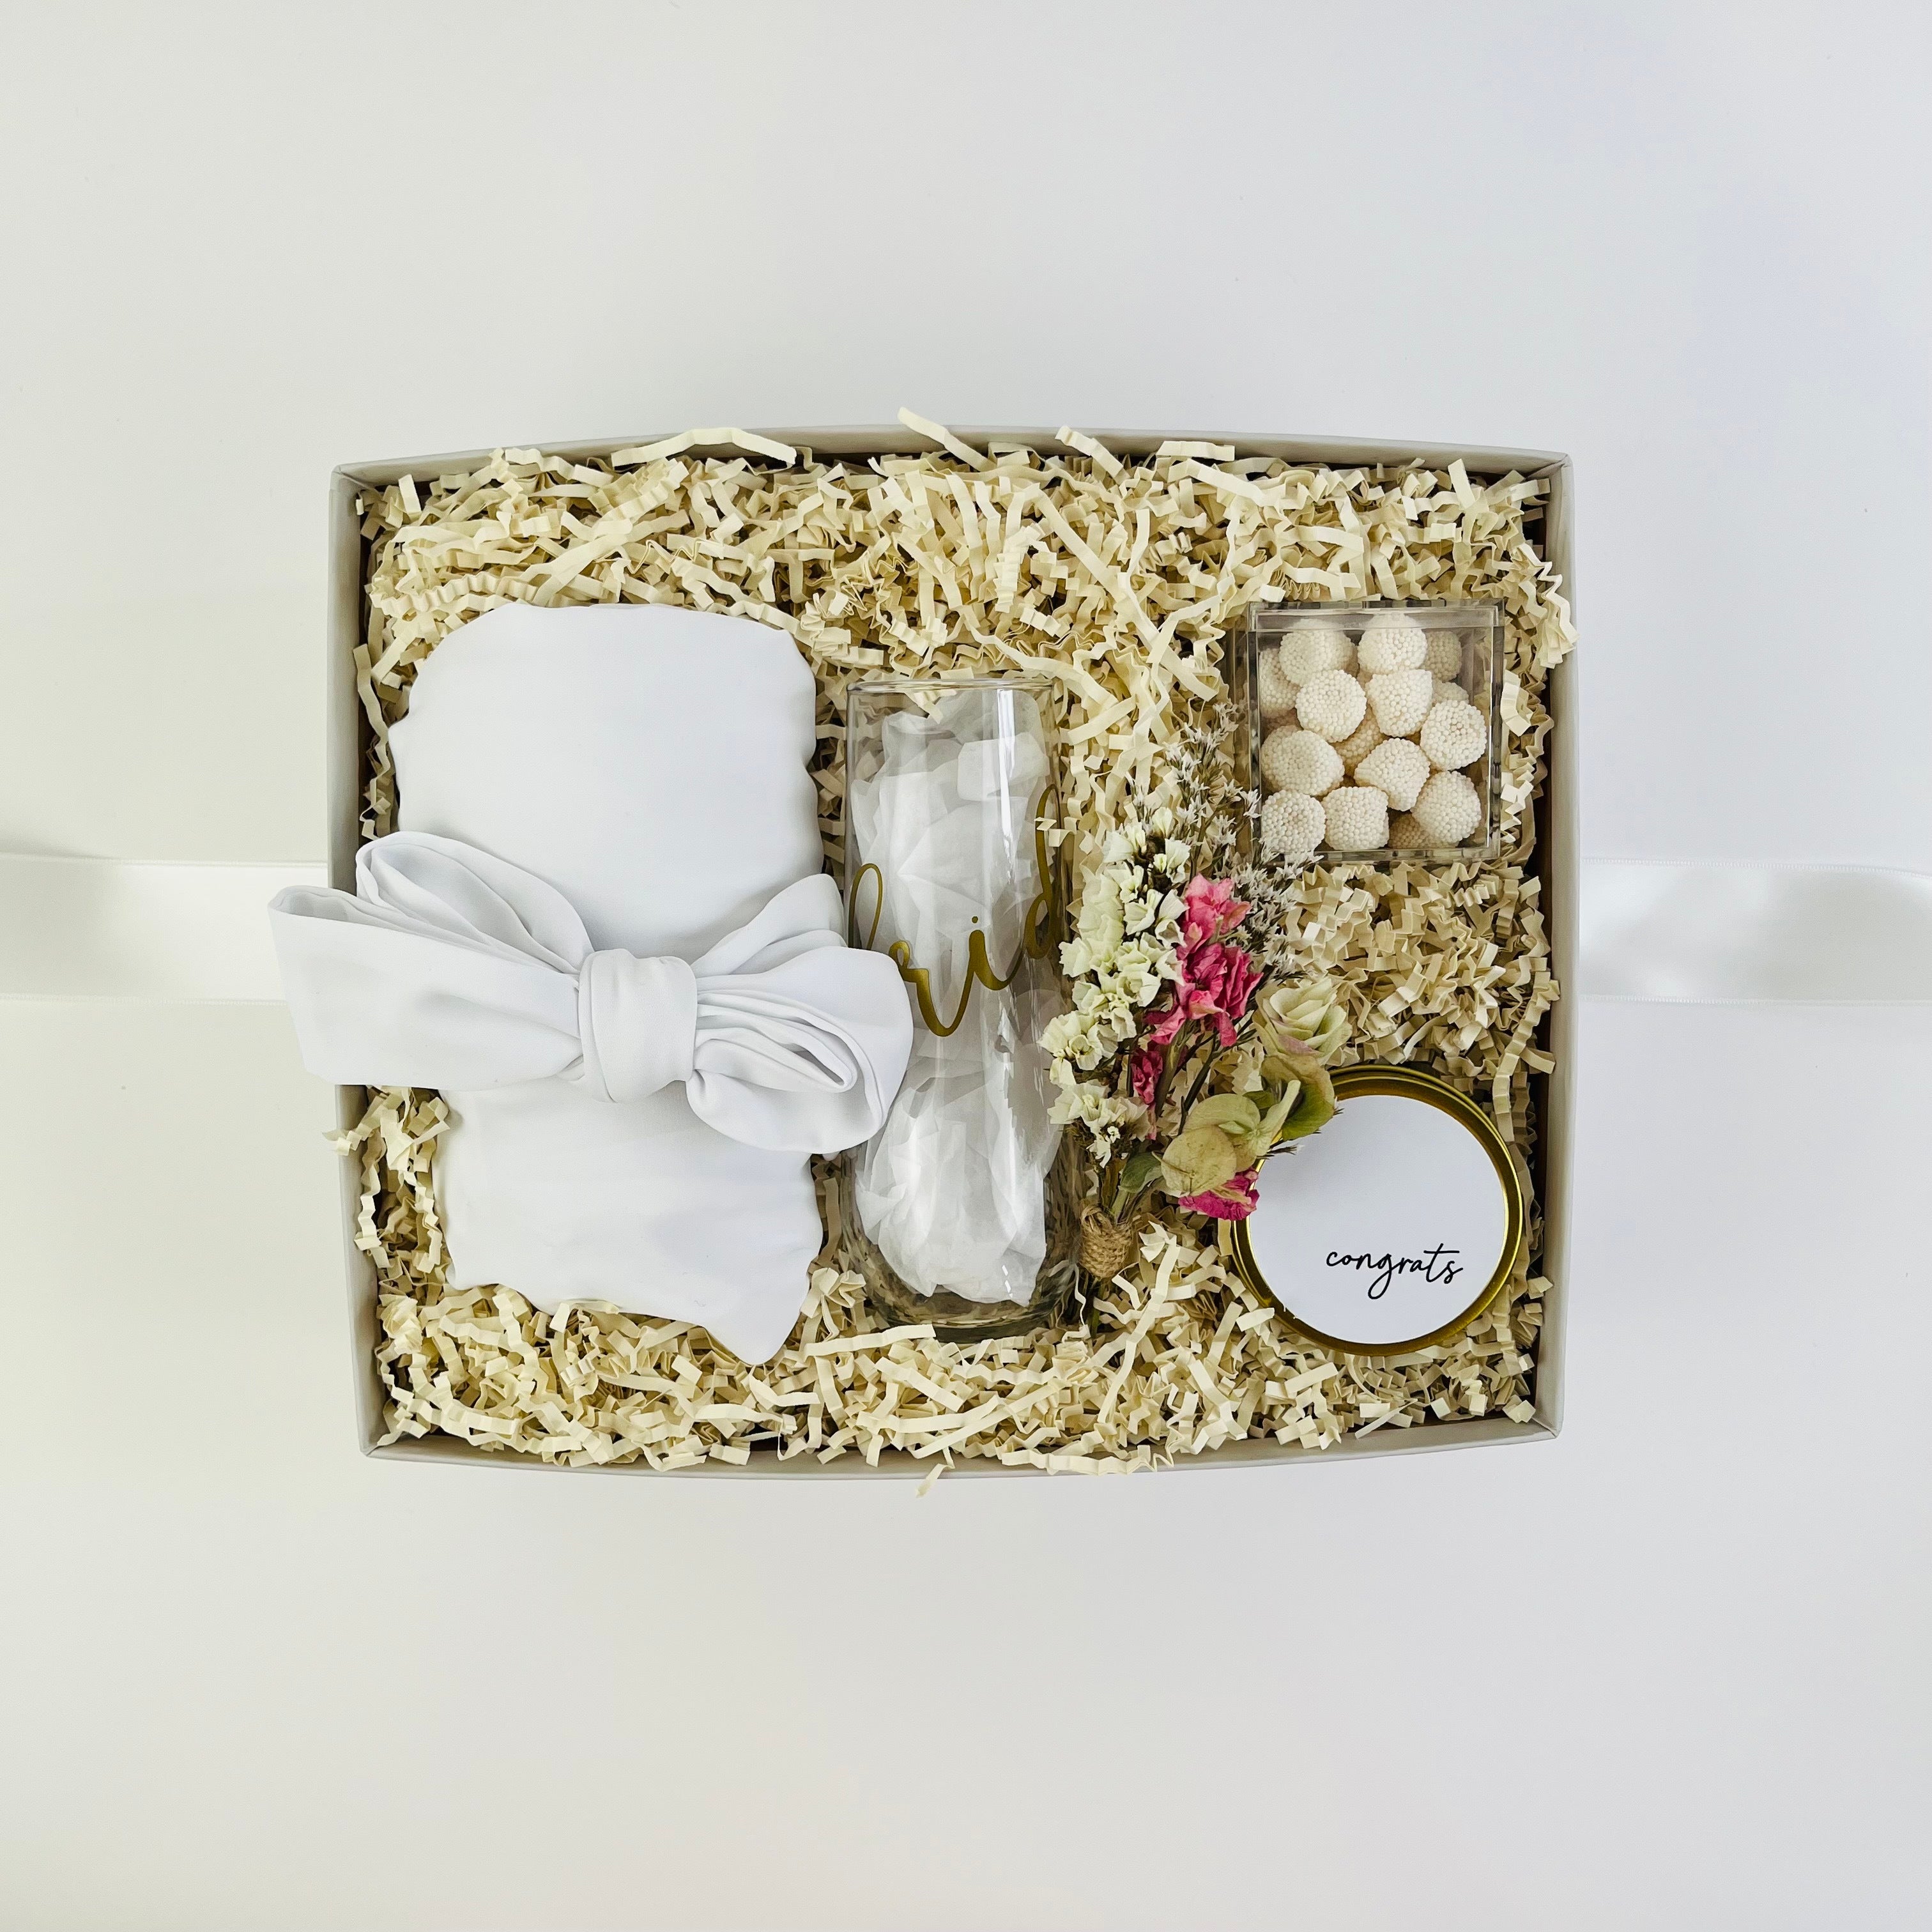 Enagement & Bridal Shower Gifts  Customized Gift Boxes - Foxblossom Co.